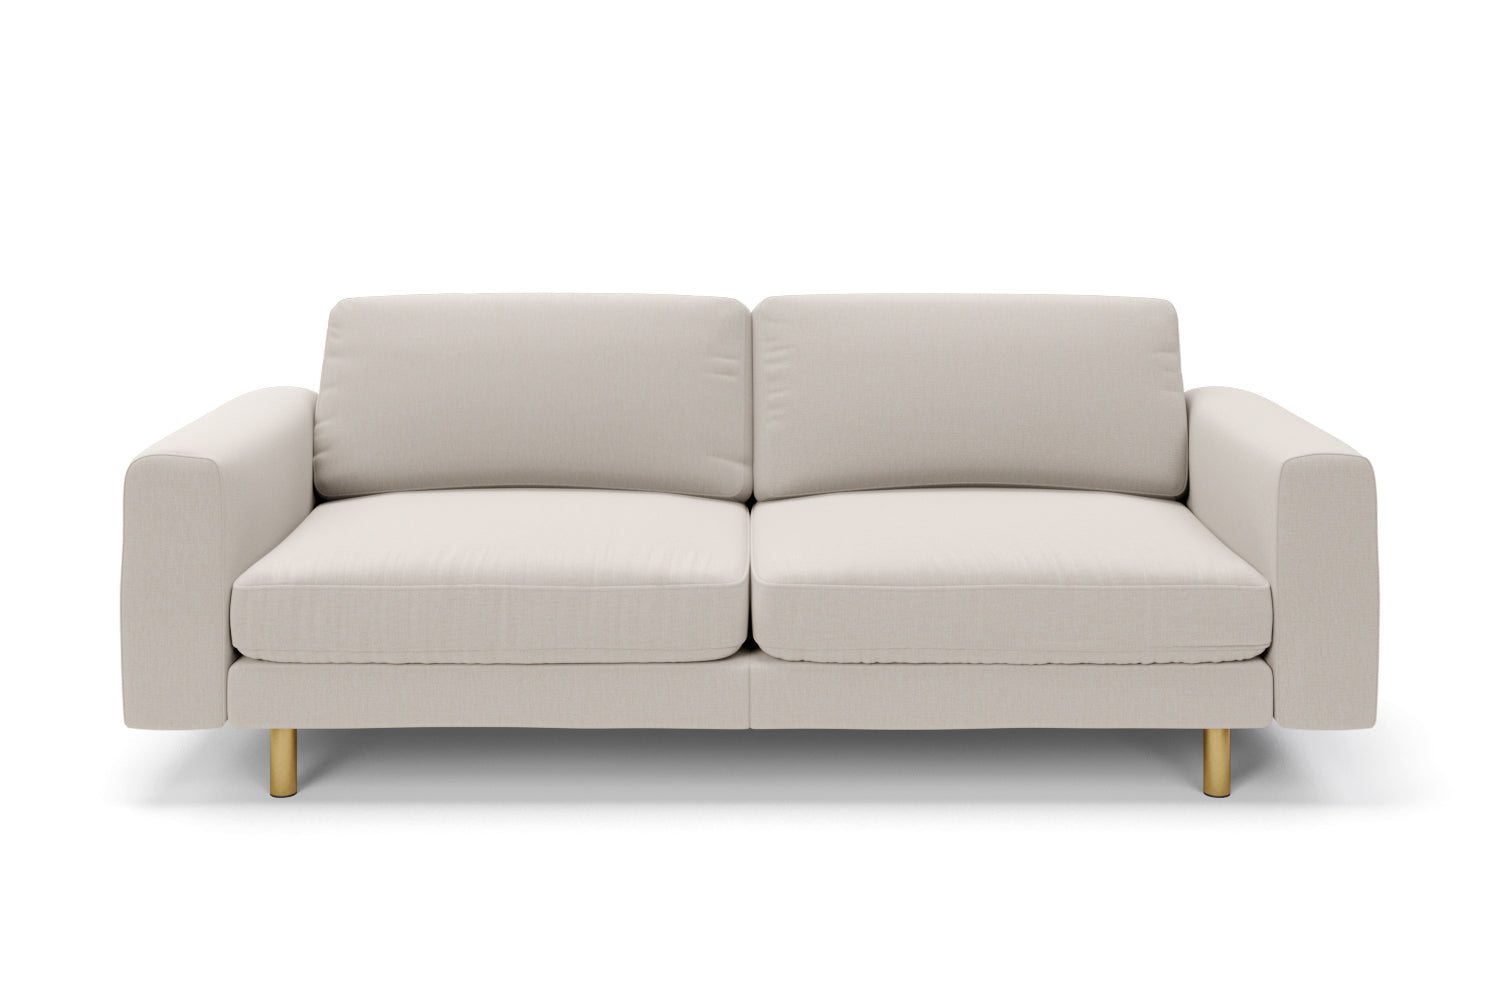 SNUG | The Big Chill 3 Seater Sofa in Biscuit variant_40520493367344